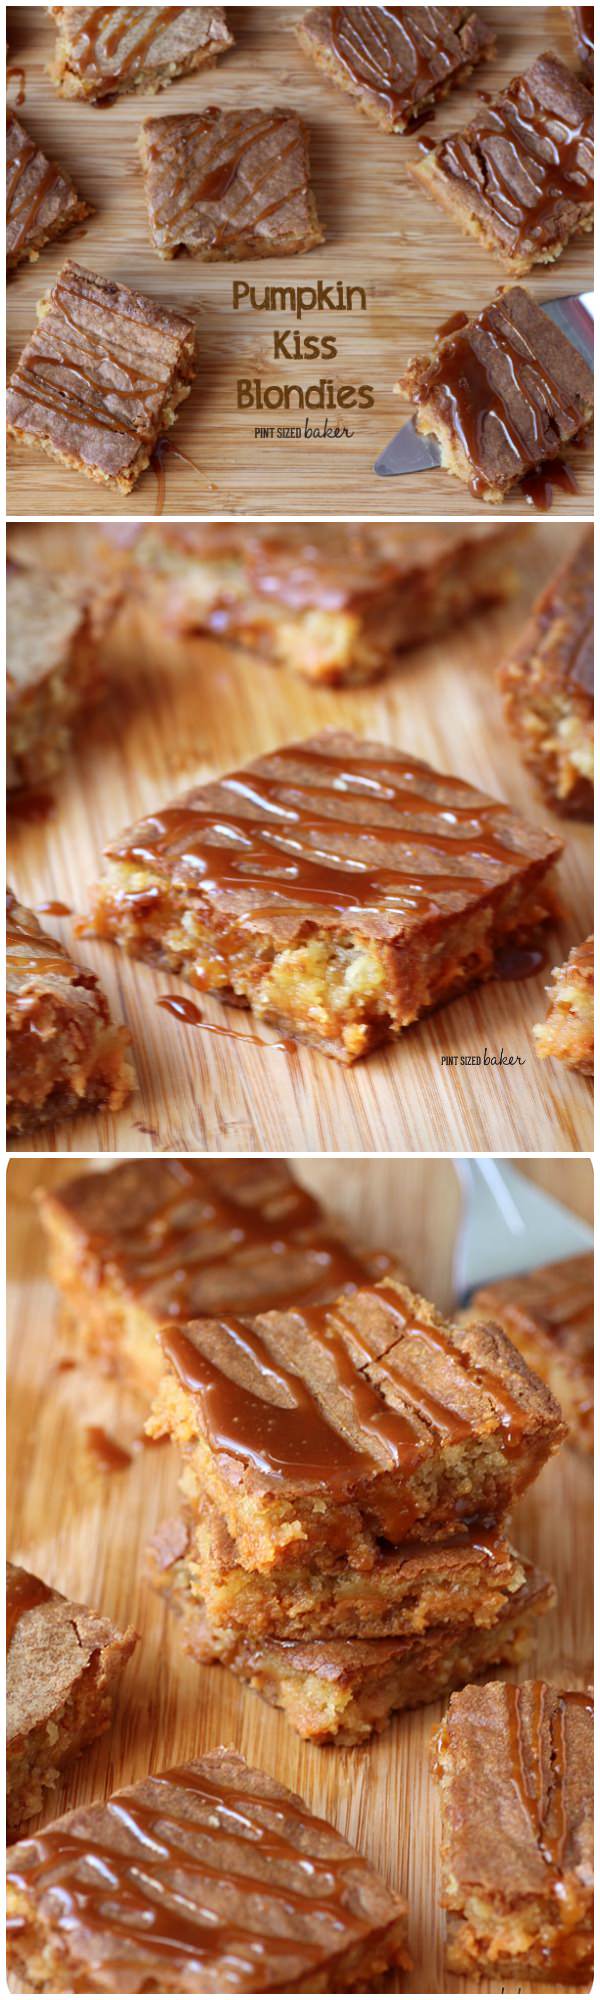 Pumpkin Kiss Caramel Blondies are so yummy for your fall baking. 